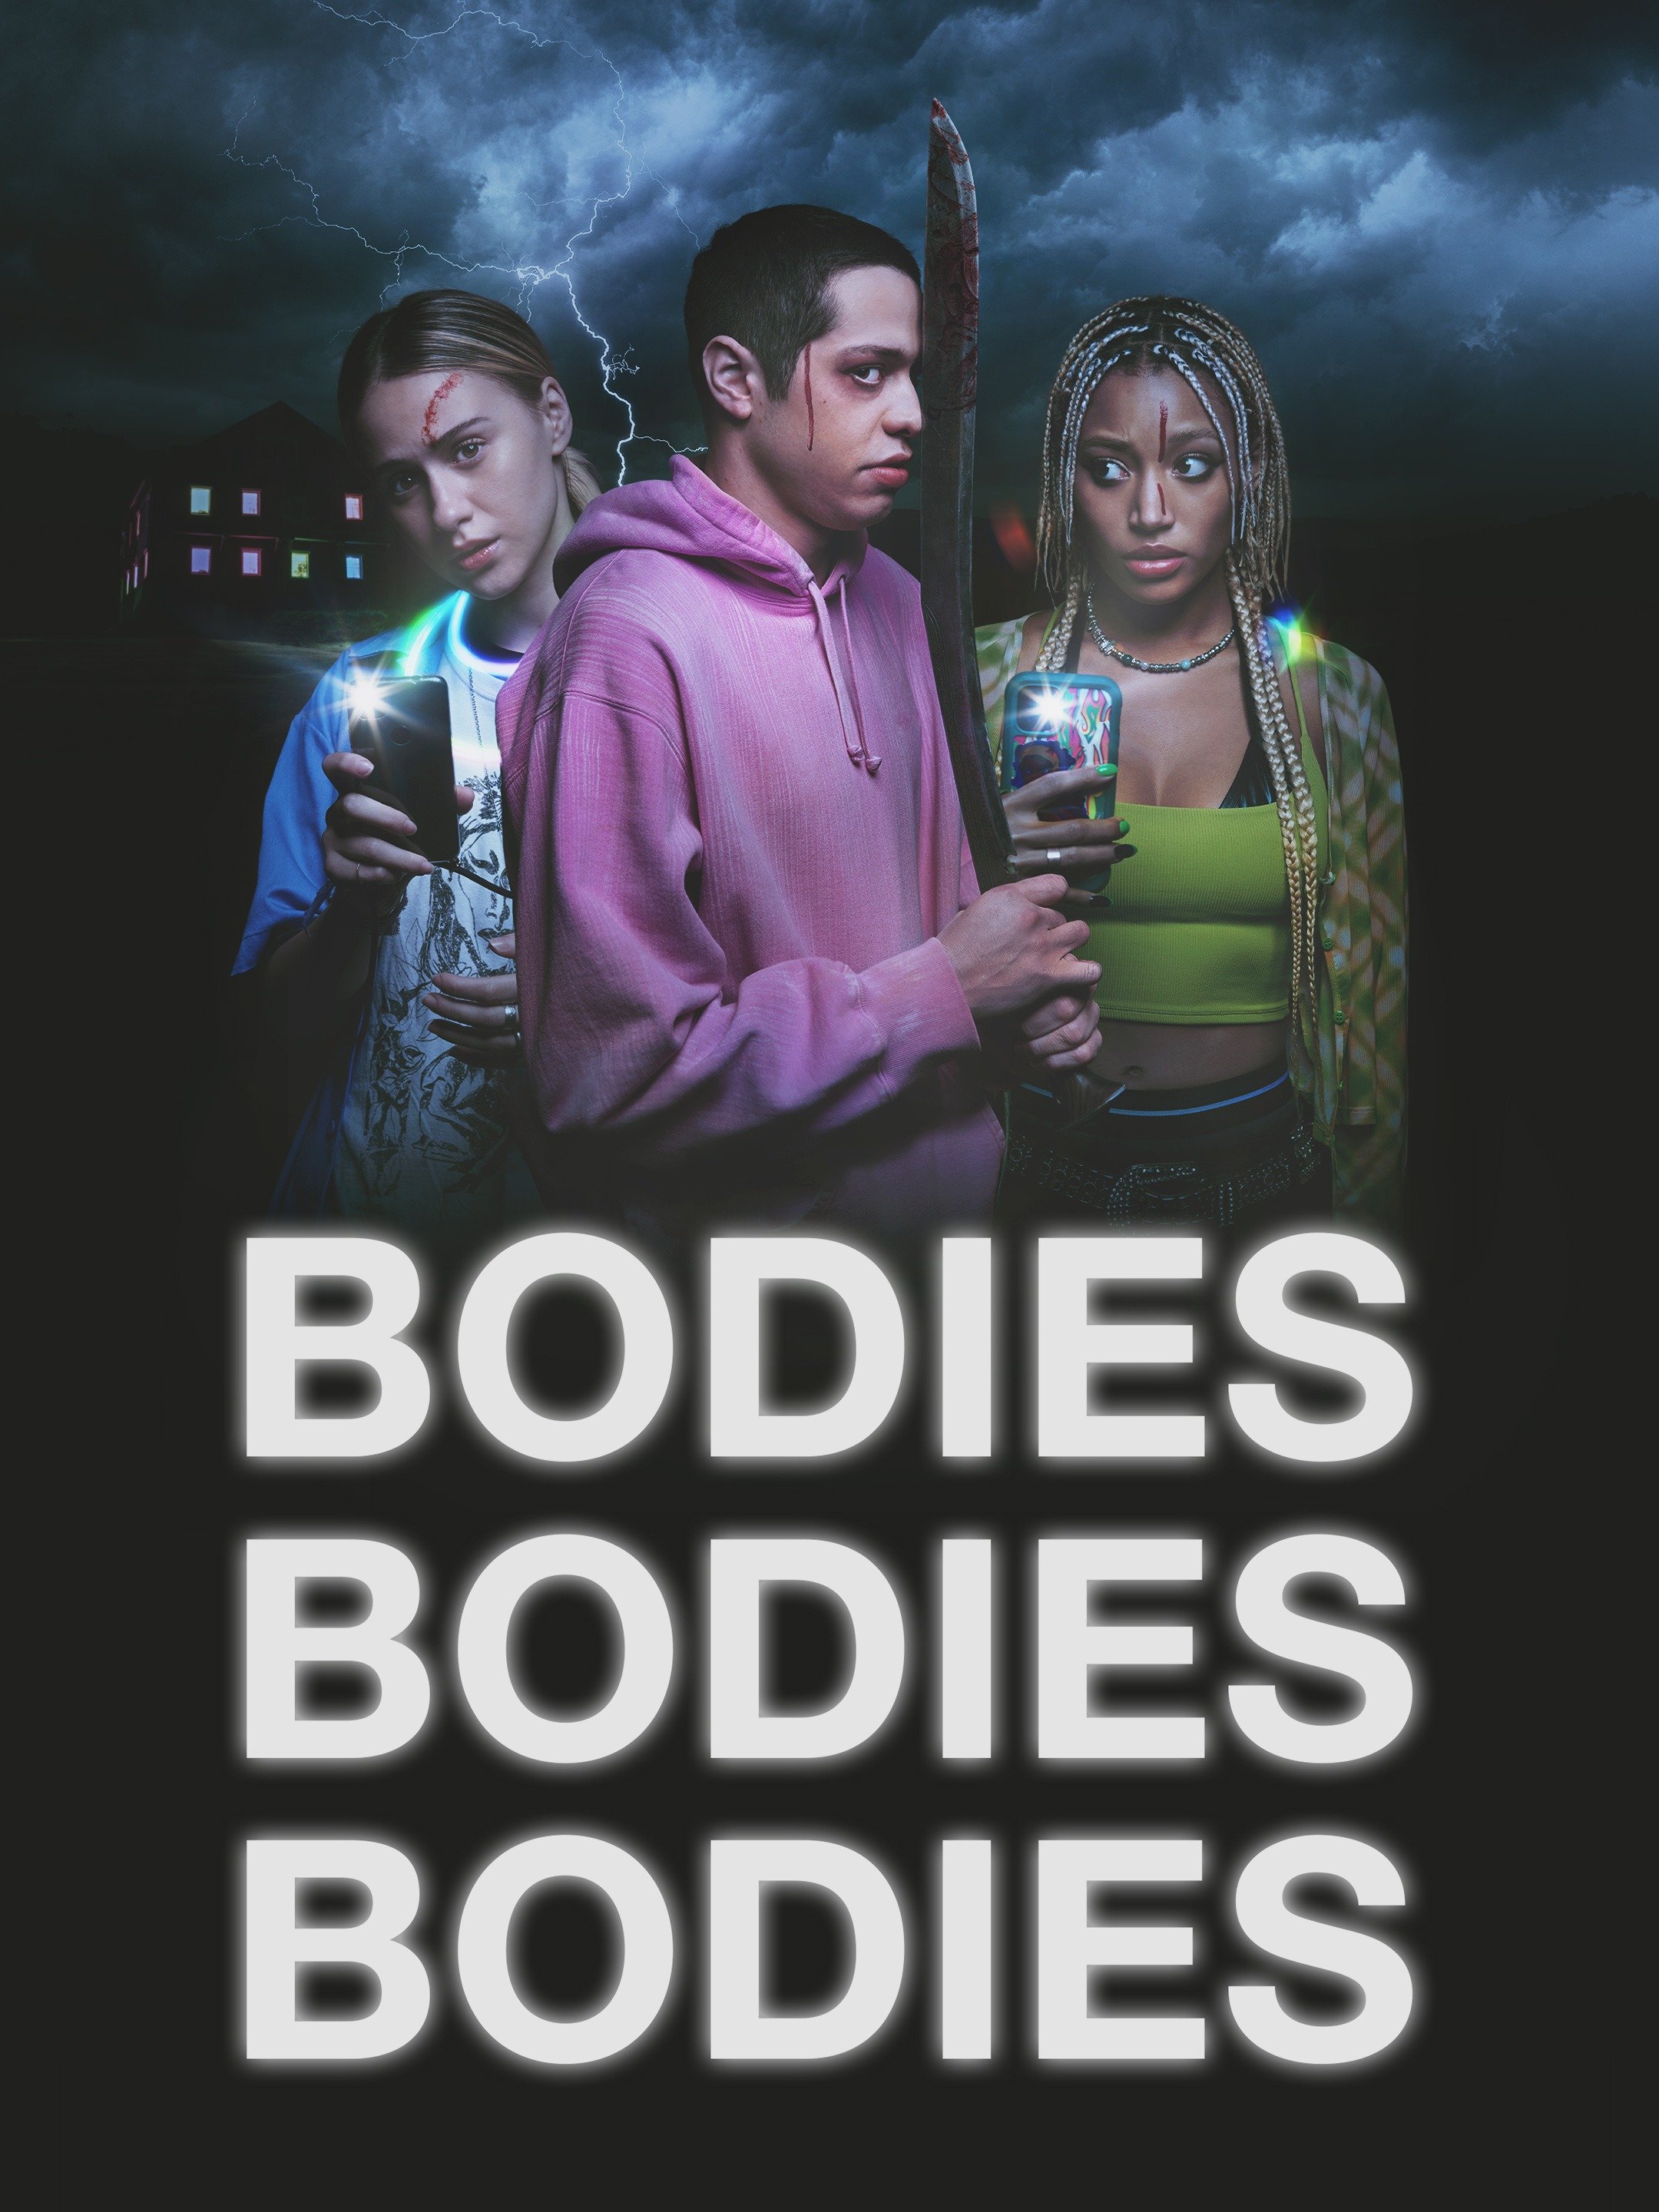 Bodies Bodies Bodies Exclusive Movie Clip Podcast Trailers And Videos Rotten Tomatoes 